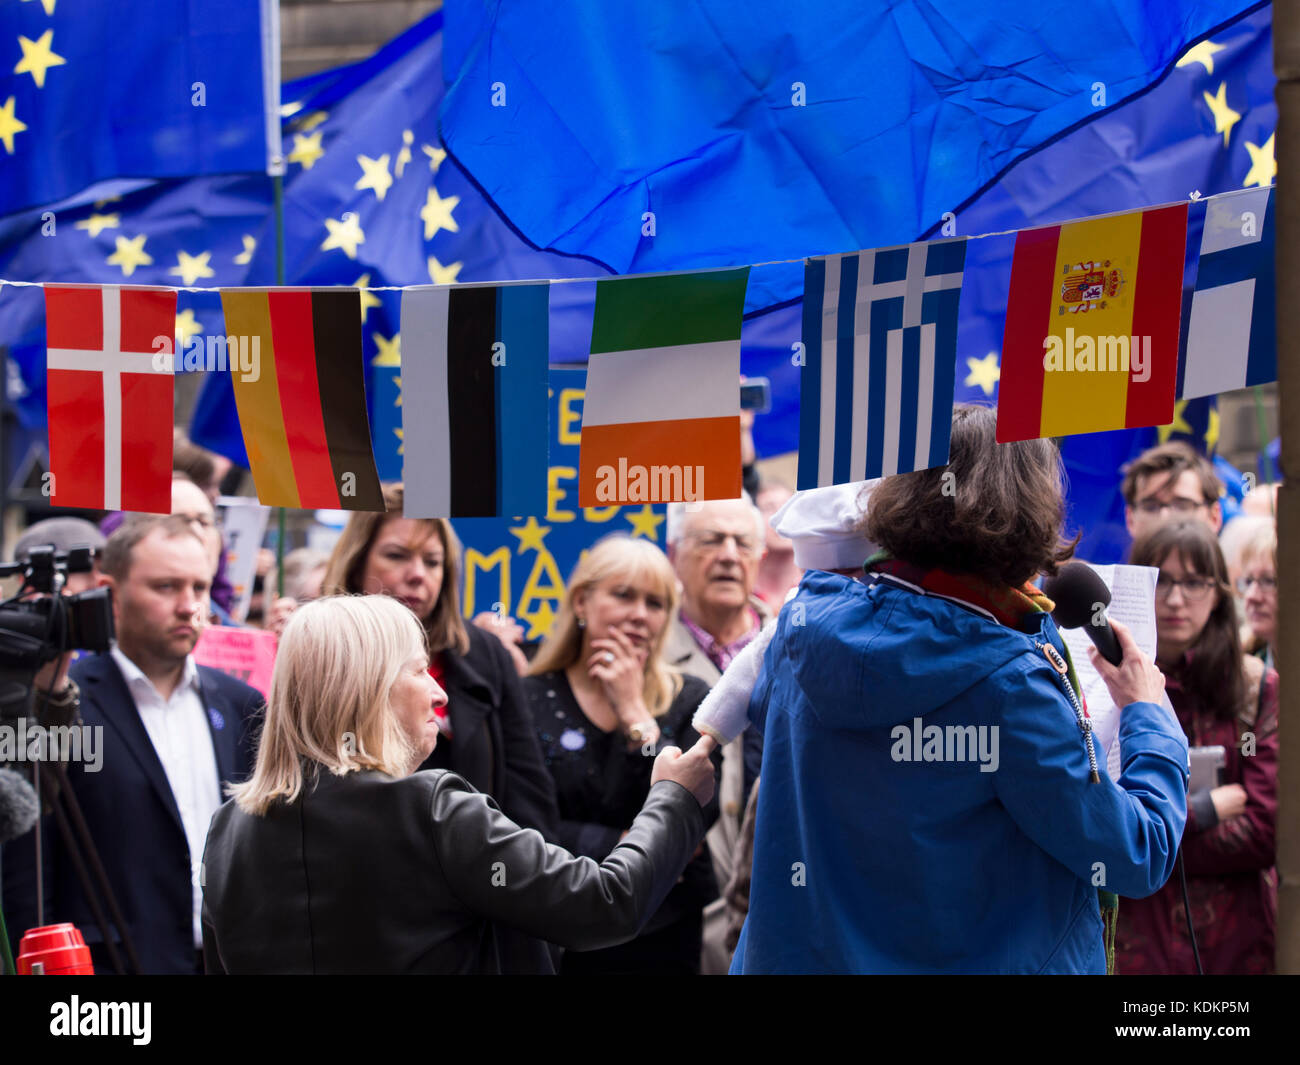 Edinburgh, UK - Oct 14, 2017: Pro EU supporters pictured as they gathered to listen to speechs at a rally against Bexit held in Edinburgh, Scotland as one of a number of gatherings across the UK to show support for continued membership of the European Union. Credit: AC Images/Alamy Live News Stock Photo